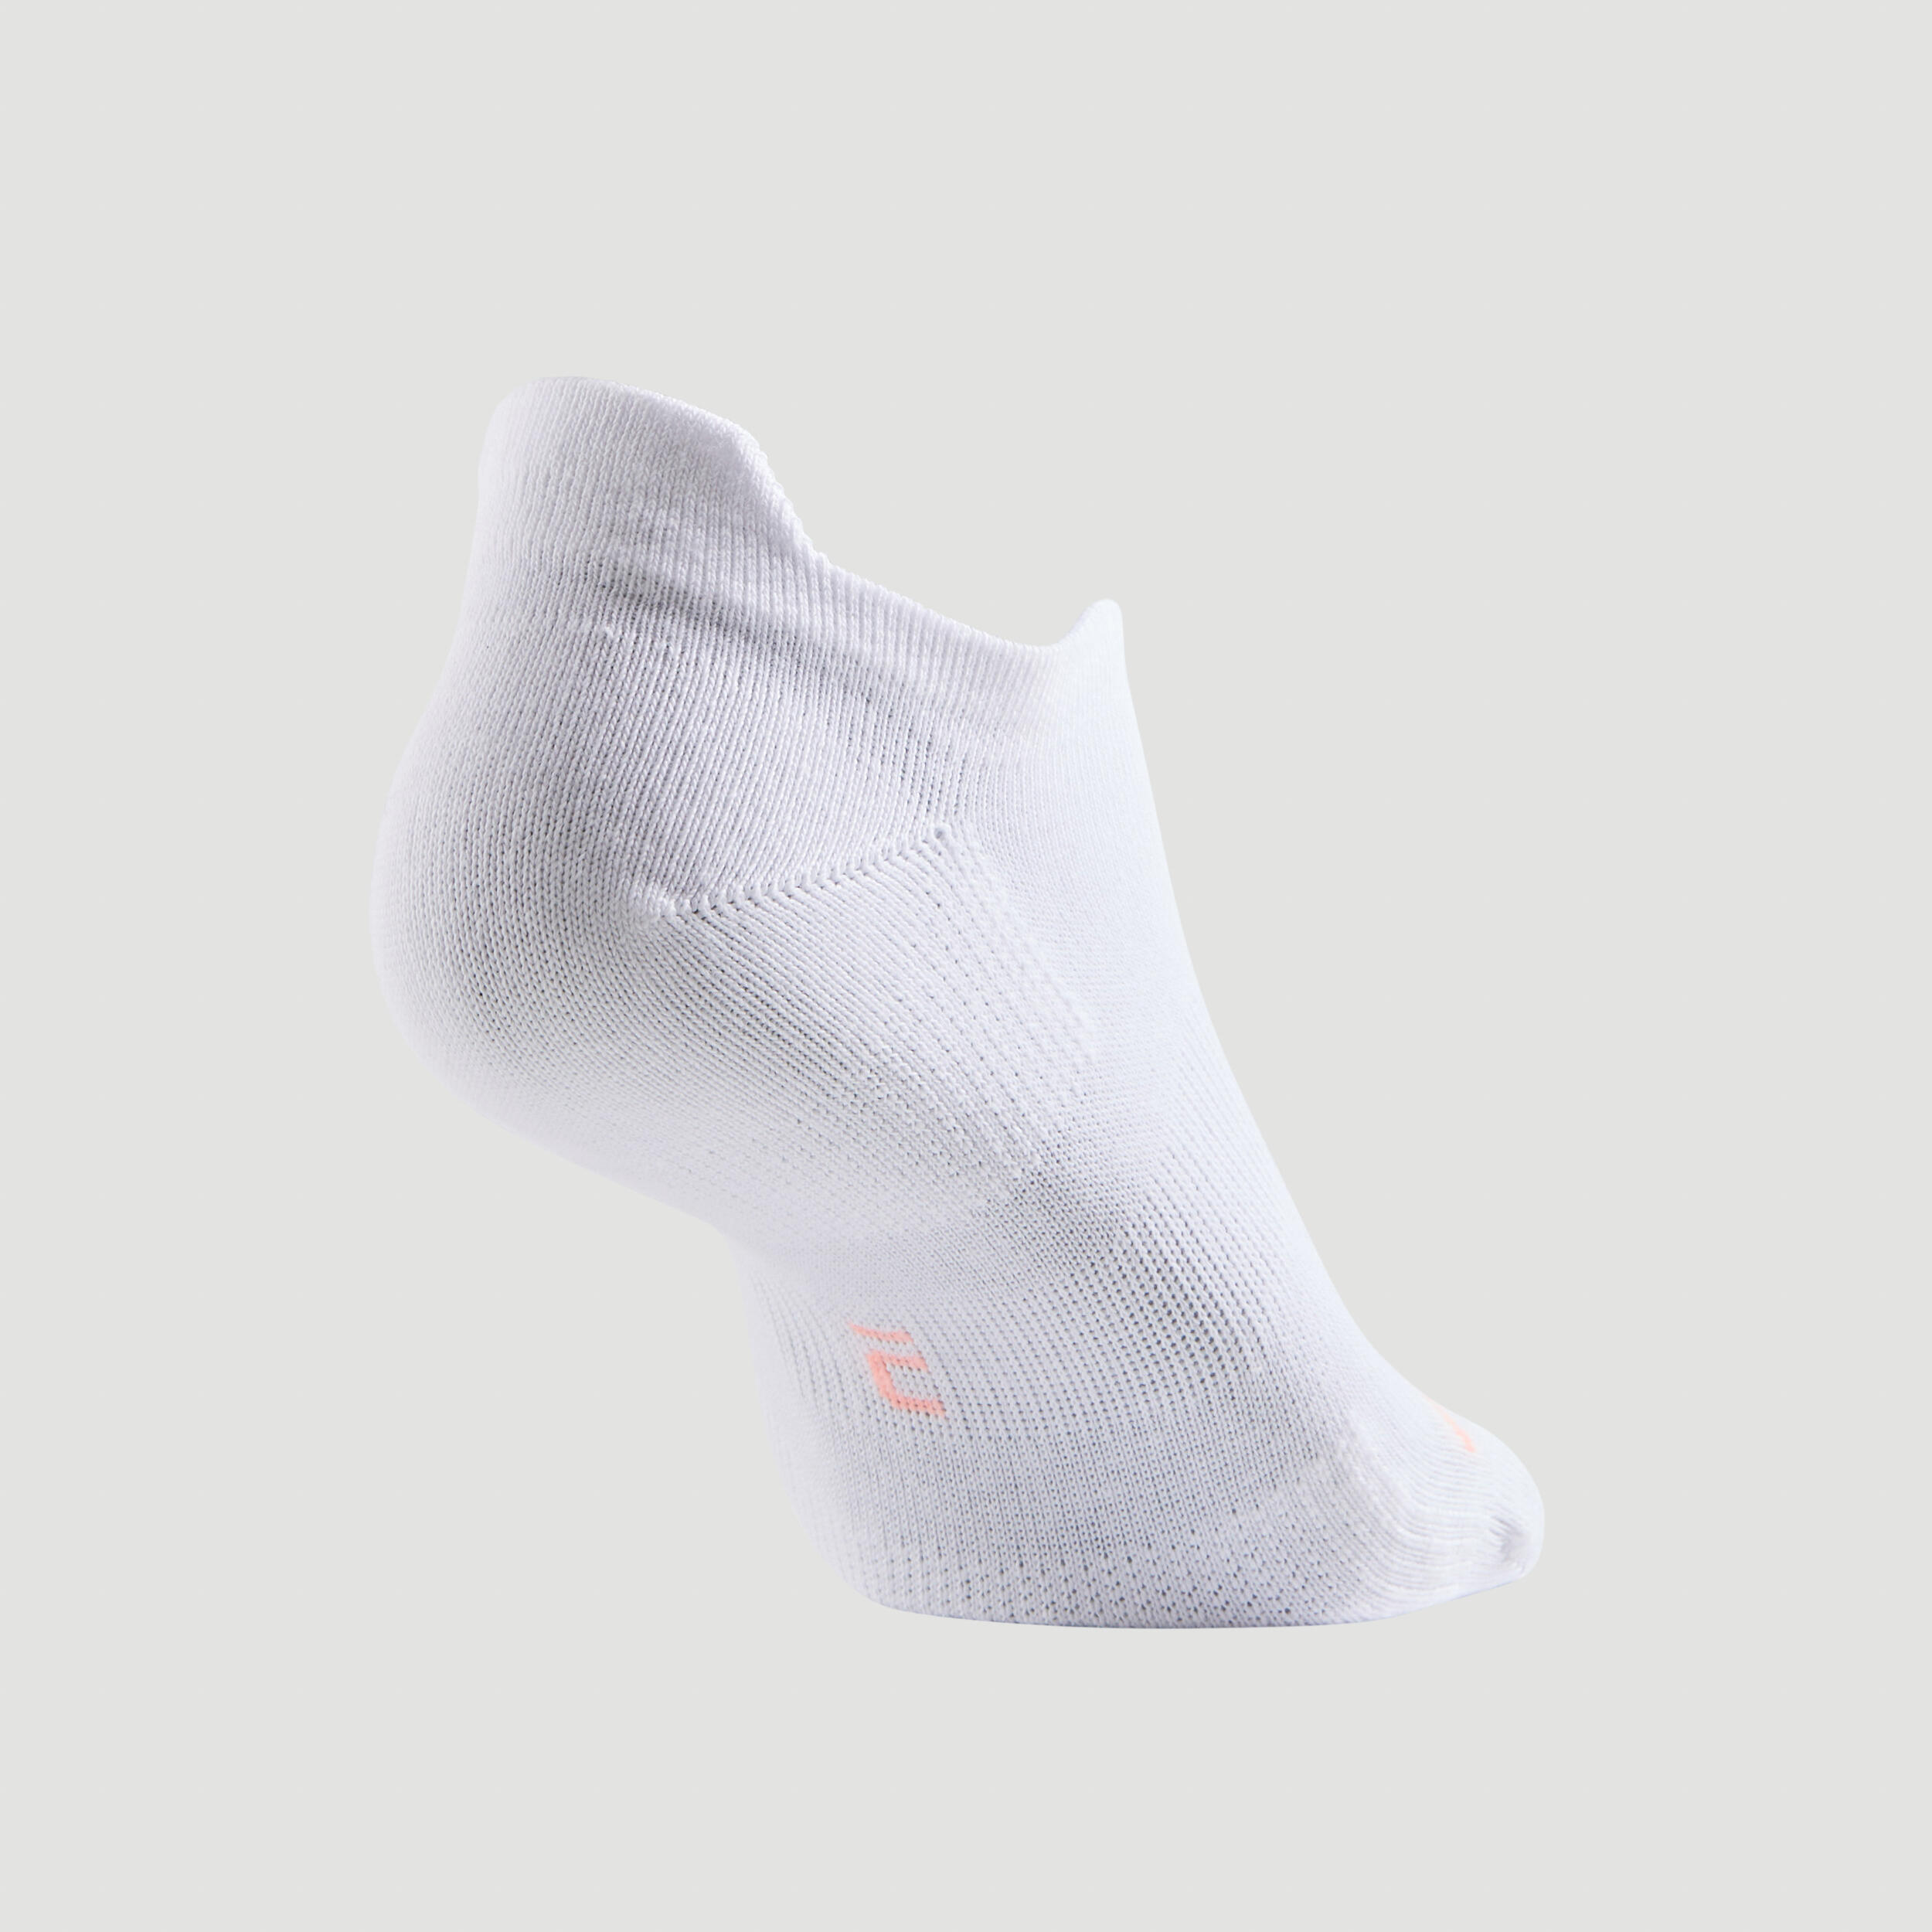 Low Sports Socks RS 160 Tri-Pack - Sky Blue/White/Pink 10/15